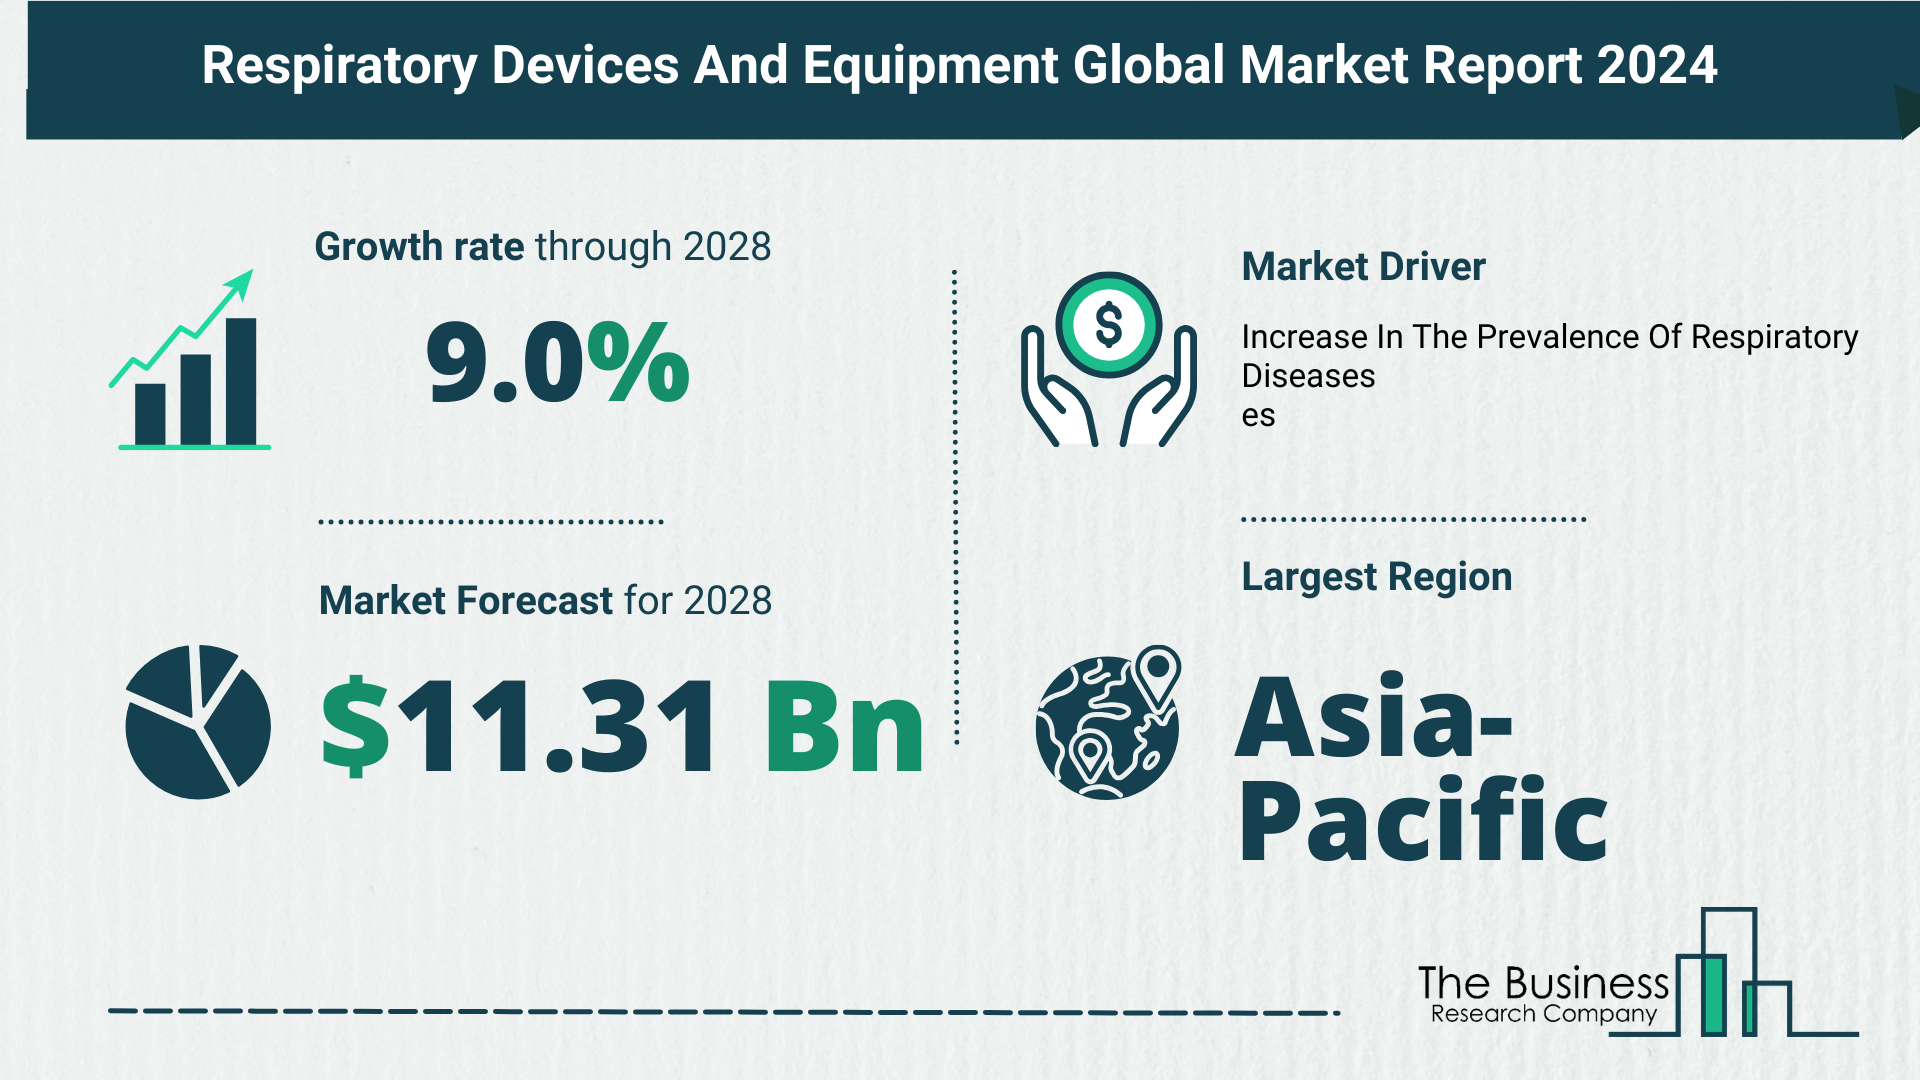 Overview Of The Respiratory Devices And Equipment (Diagnostic) Market 2024: Size, Drivers, And Trends